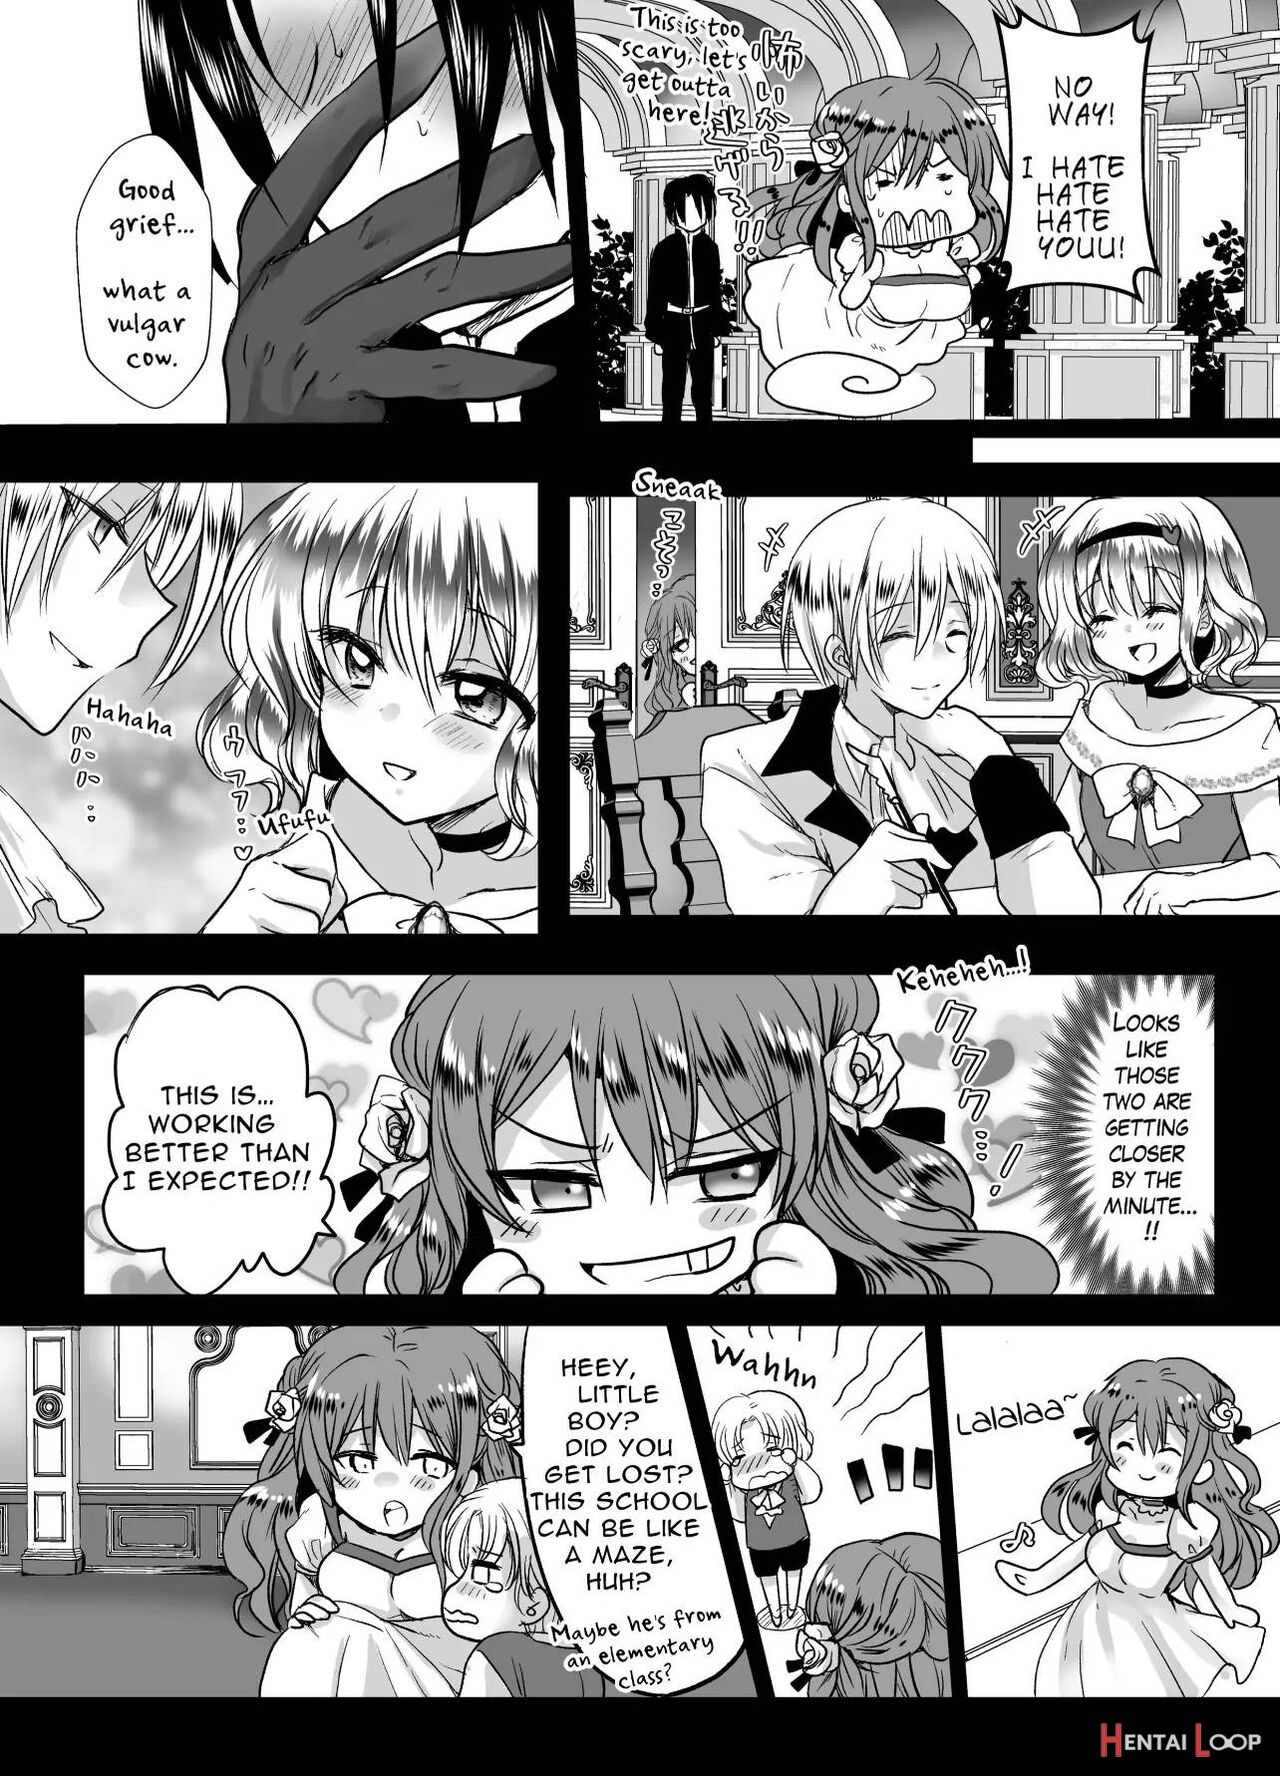  jk's Tragic Isekai Reincarnation As The Villainess ~but My Precious Side Character!~ page 14